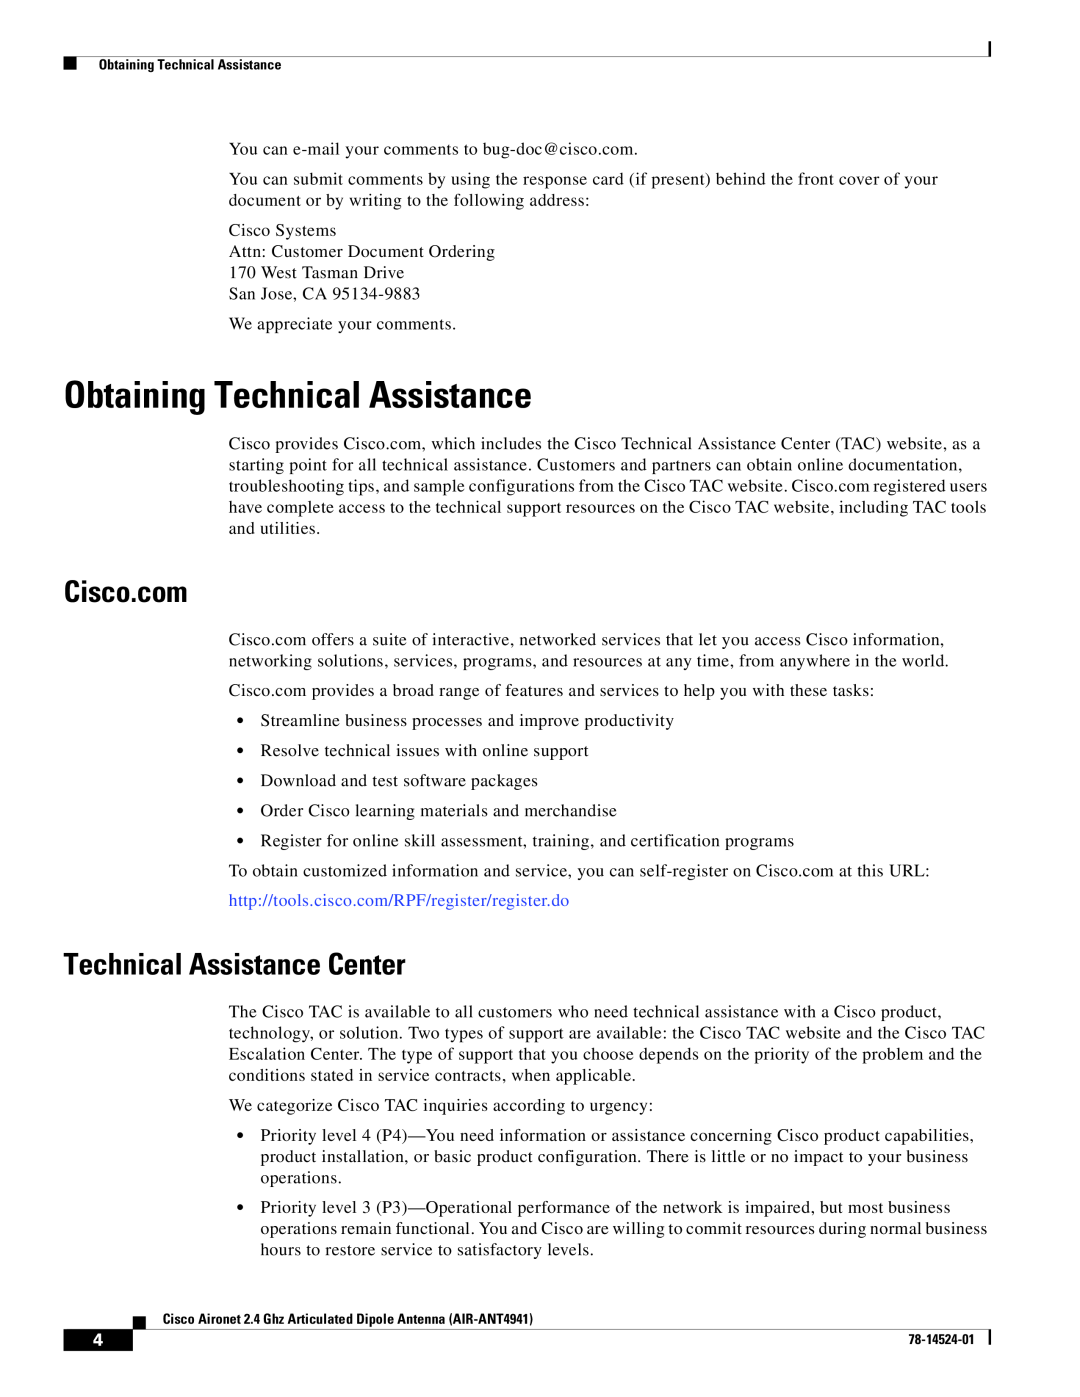 Cisco Systems AIR-ANT4941 technical specifications Obtaining Technical Assistance, Technical Assistance Center 